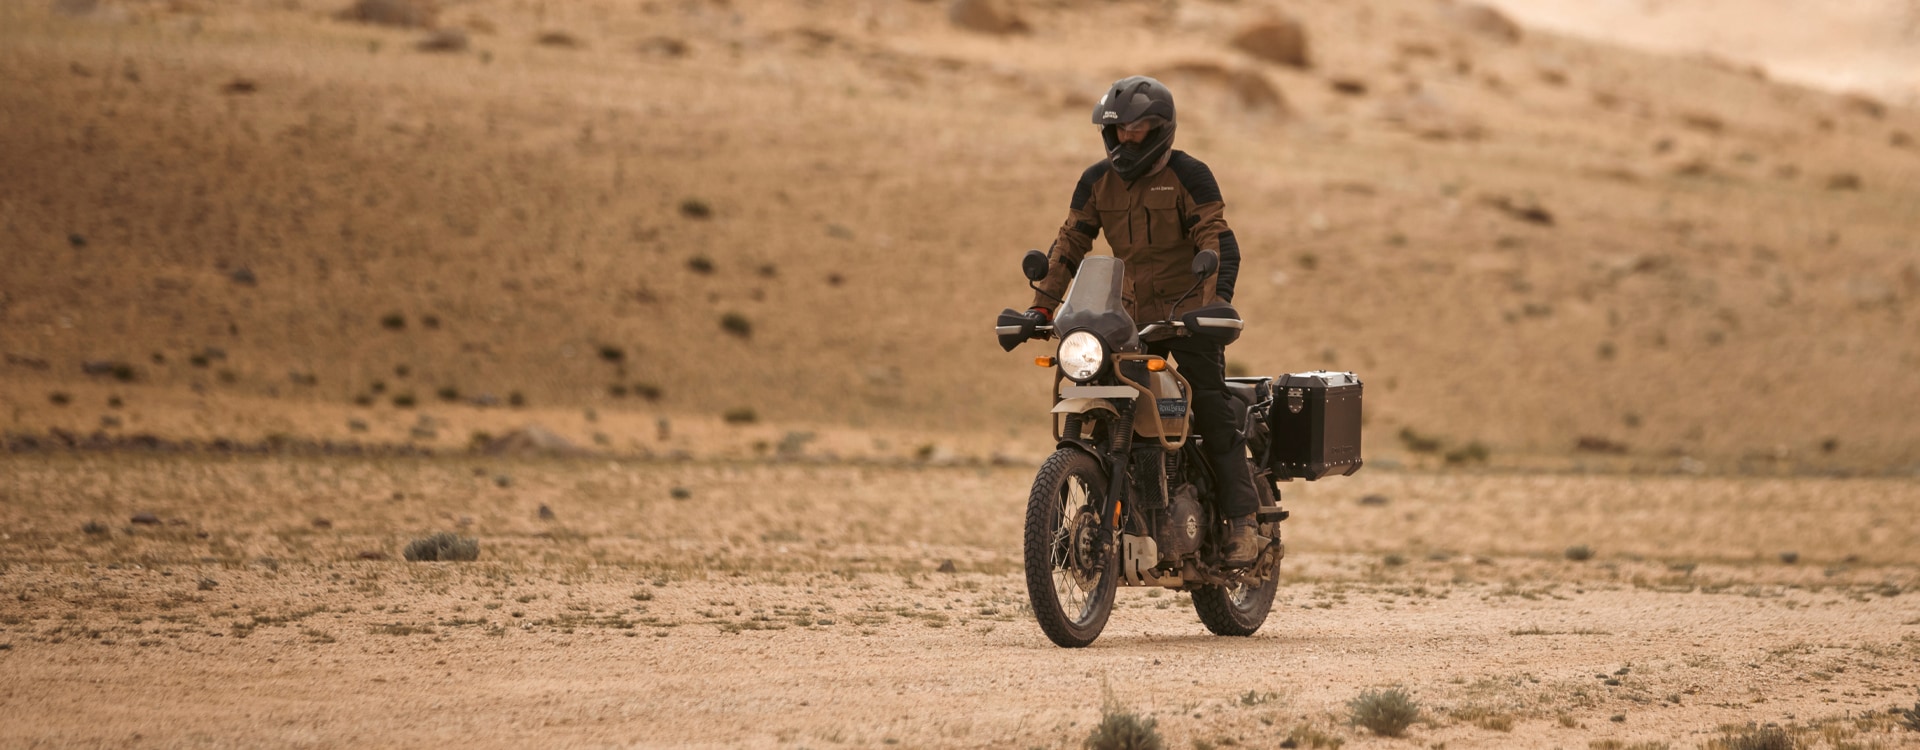 Himalayan 410 - Motorcycle Designed to explore